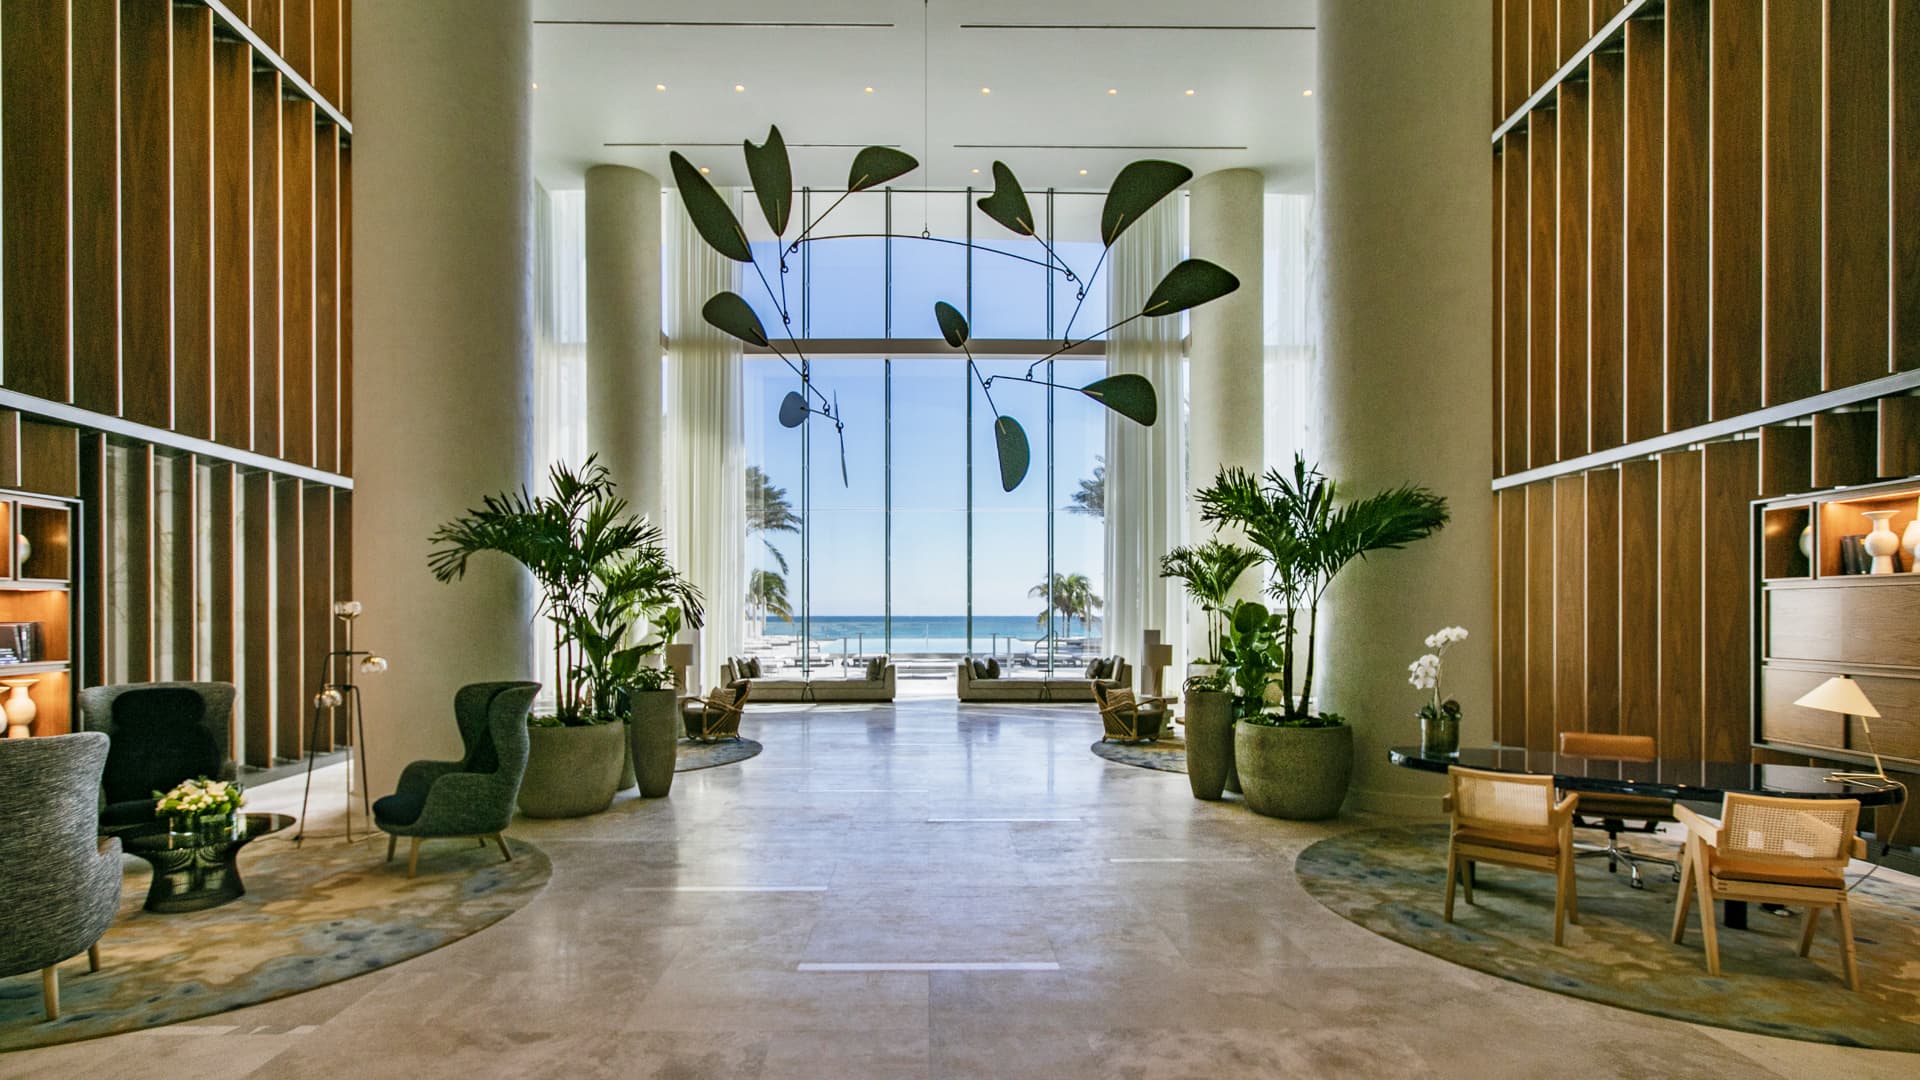 The grand lobby with views across the pool and ocean.